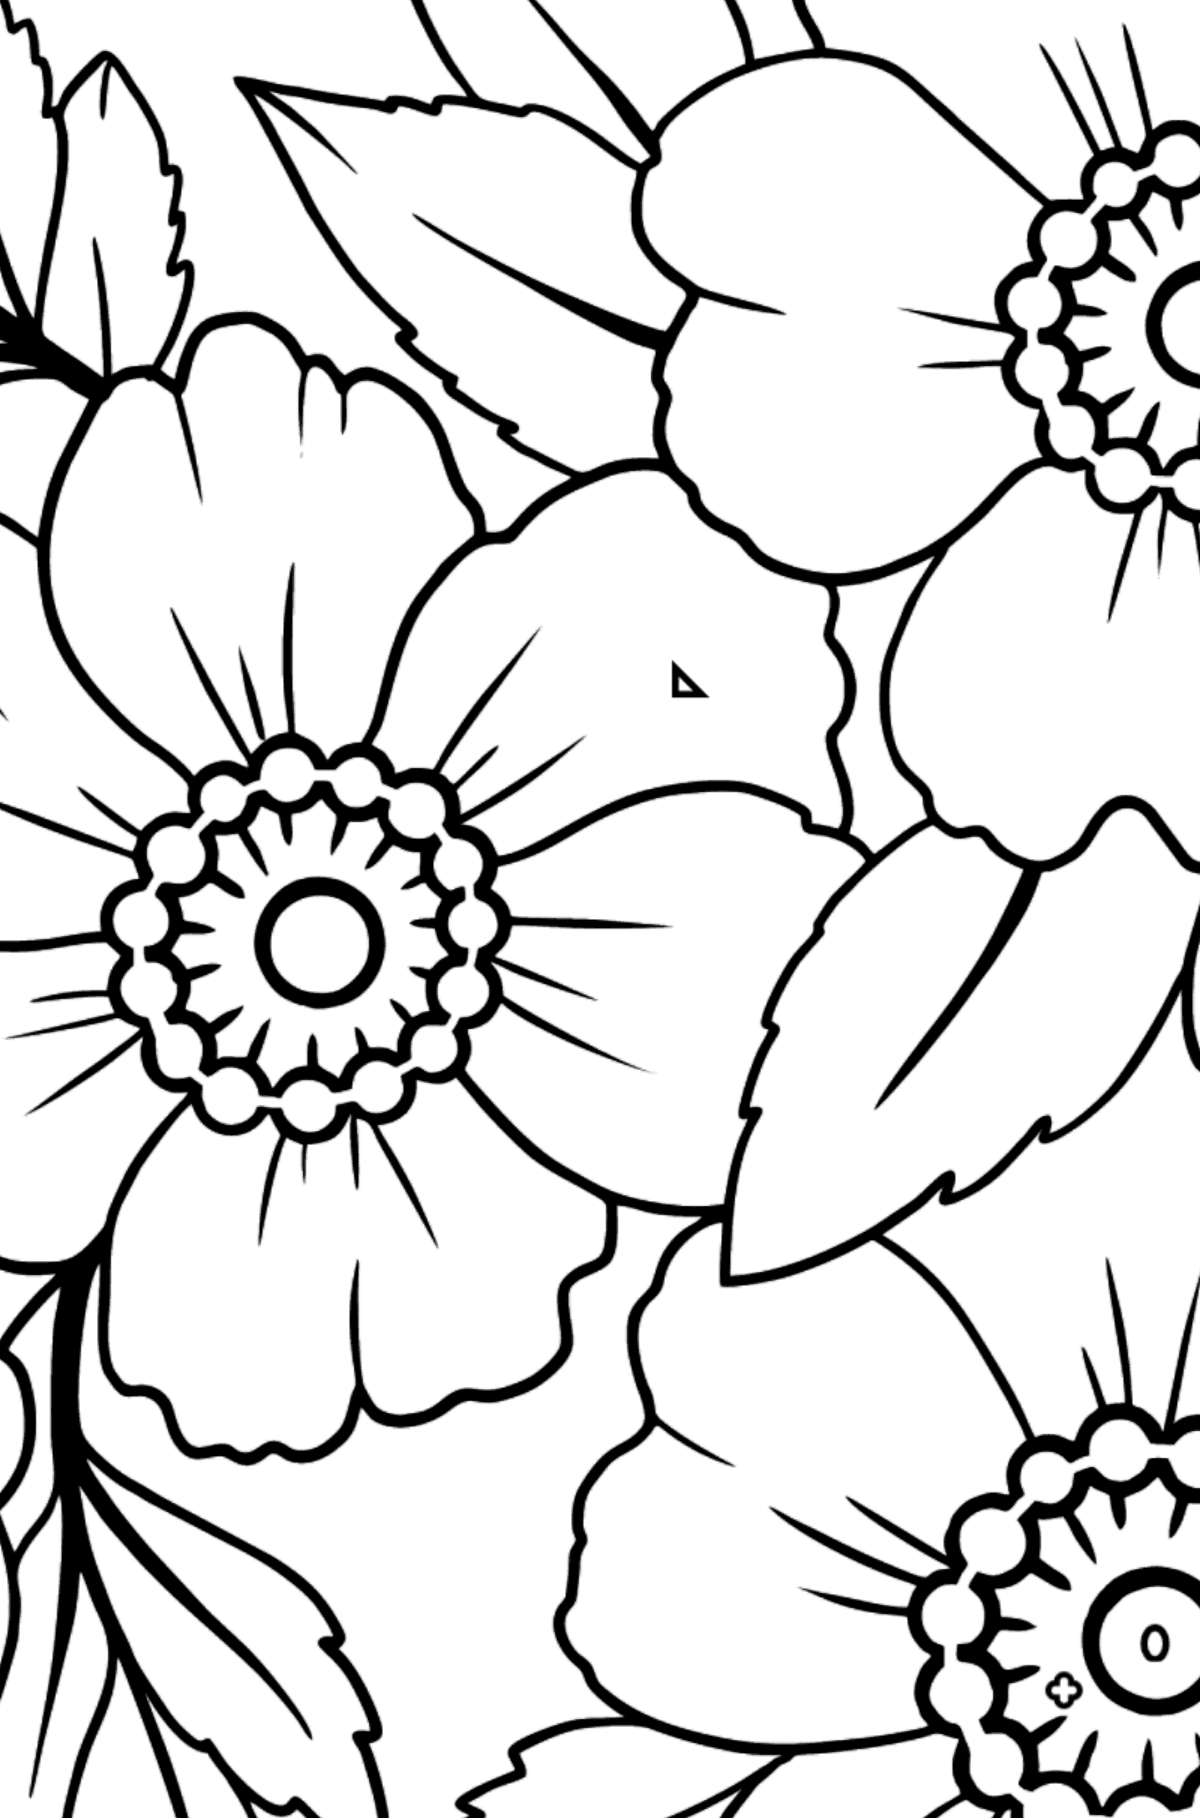 Flower Coloring Page - Japanese Velvet Anemone - Coloring by Geometric Shapes for Kids